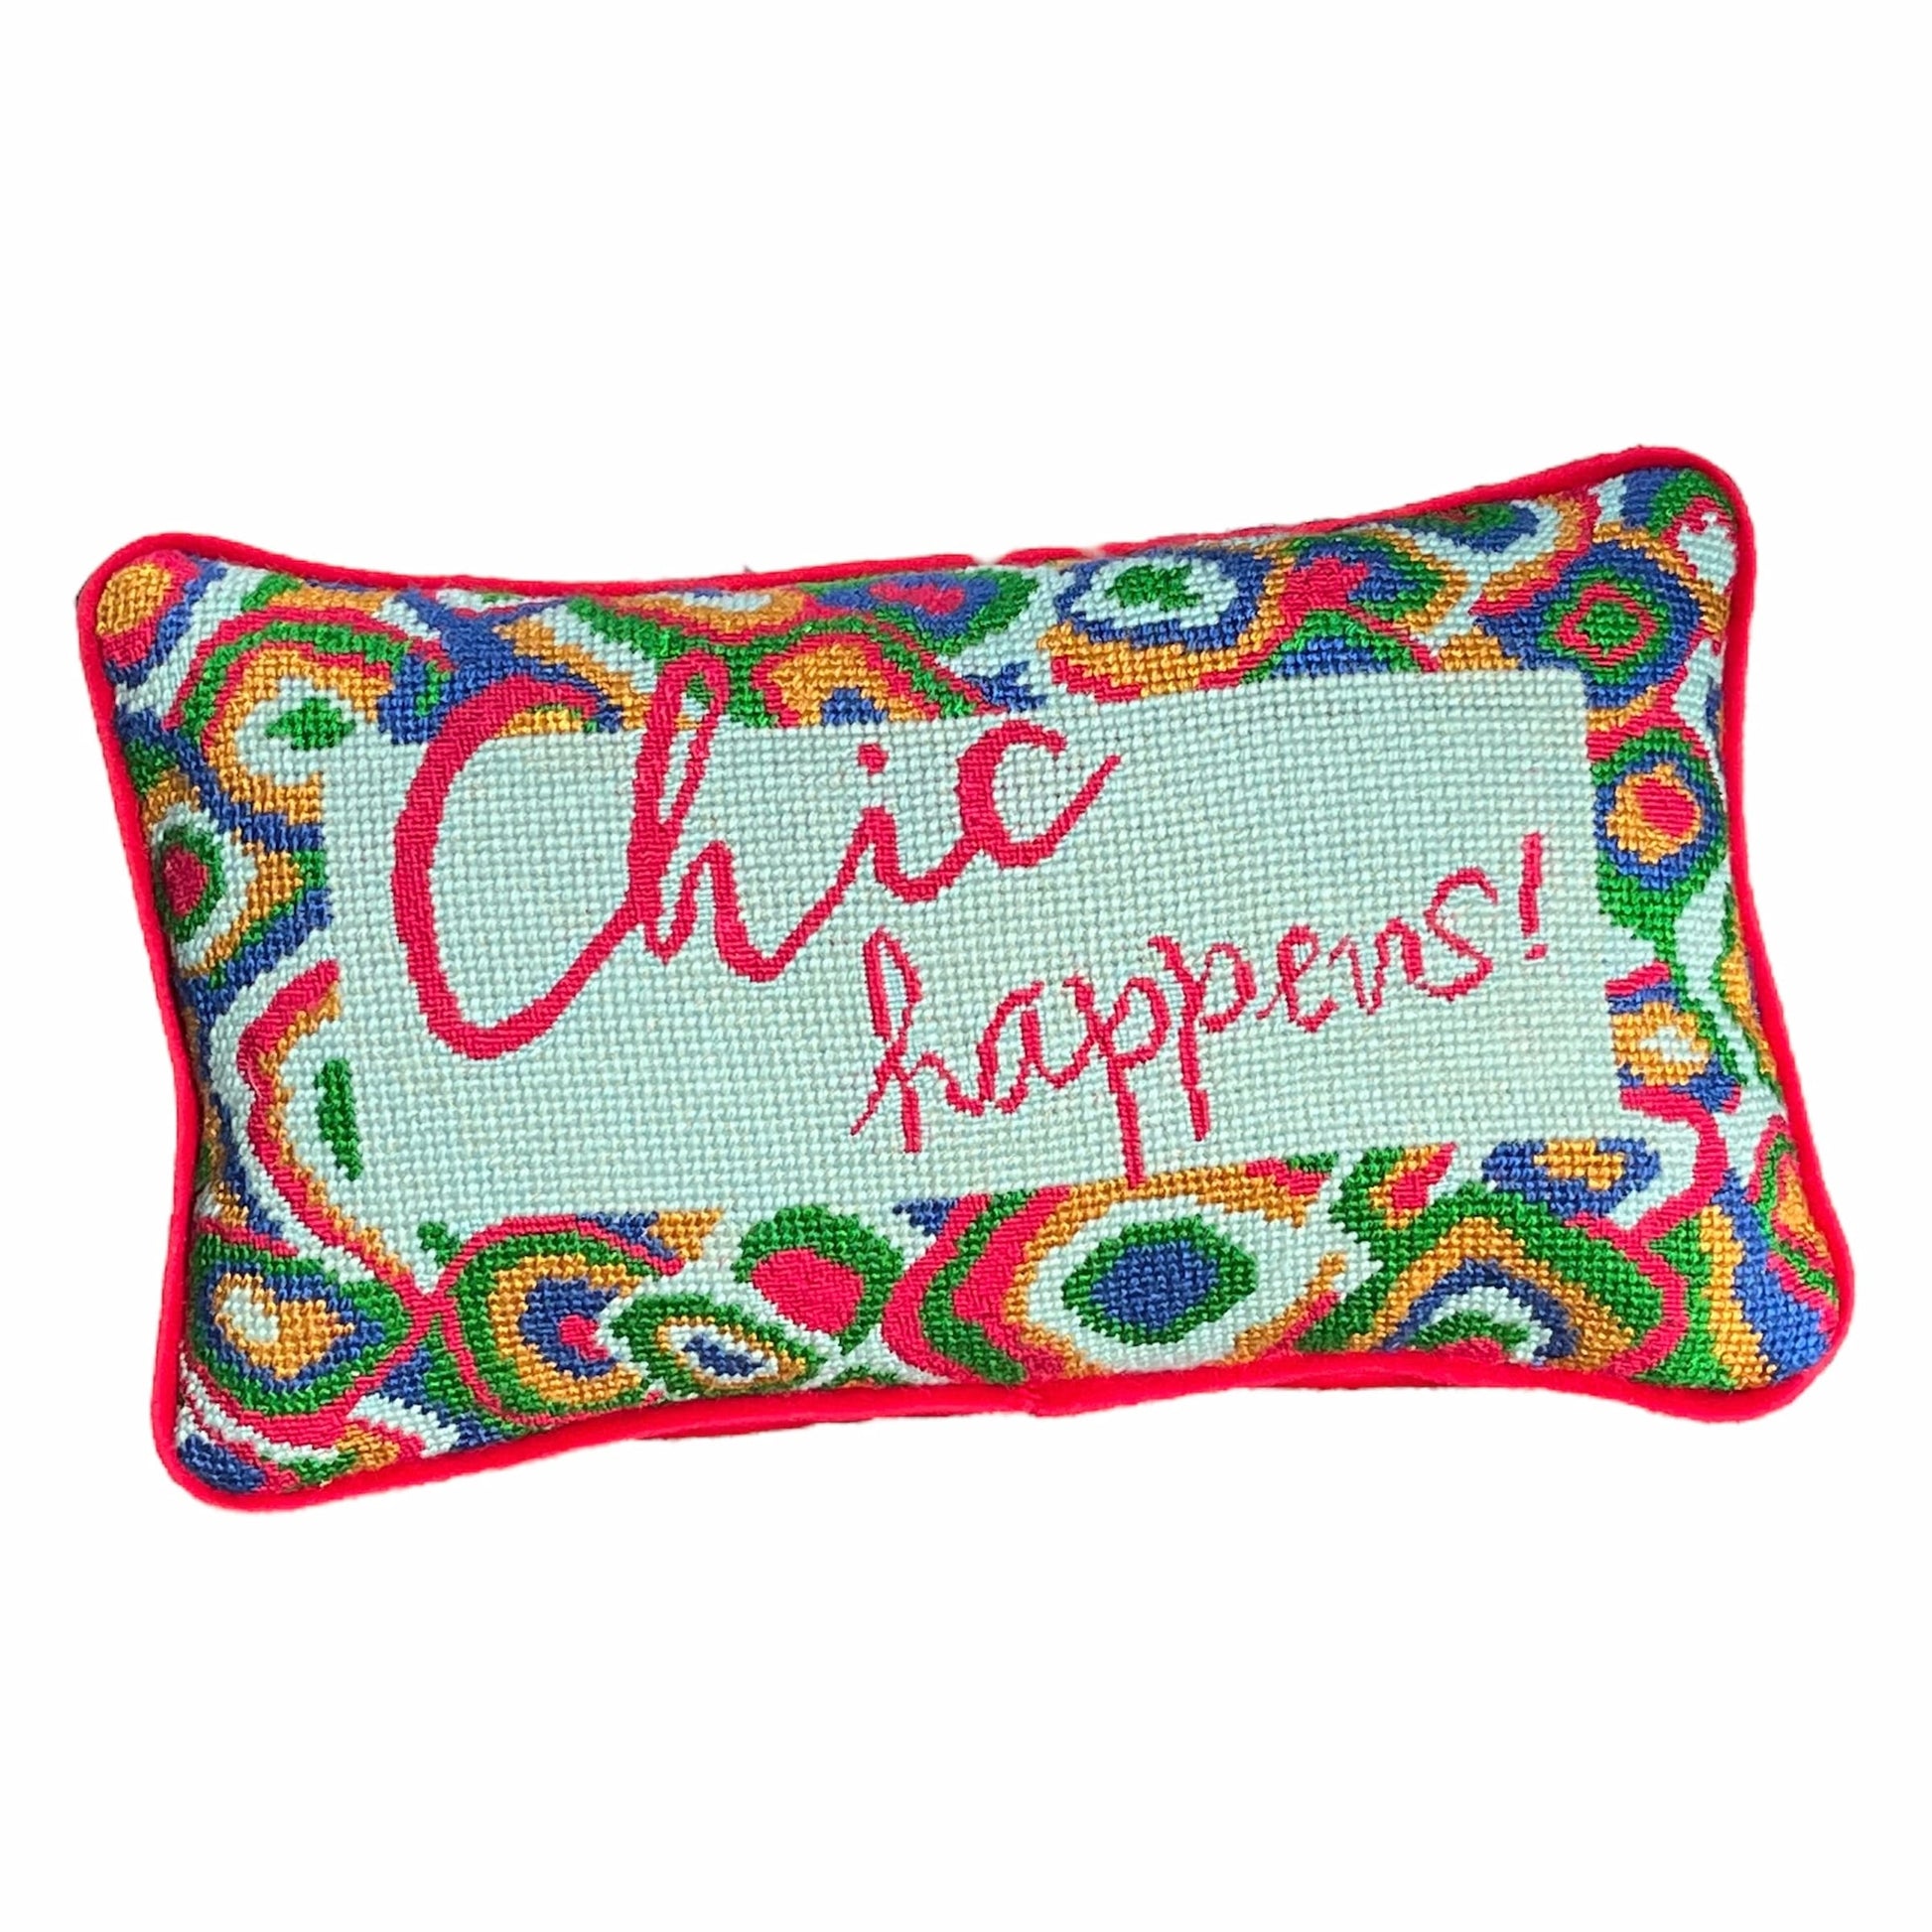 hand-embroidered needlepoint pillow features red, green, blue & gold paisley border with "Chic Happens!" written in red in the center